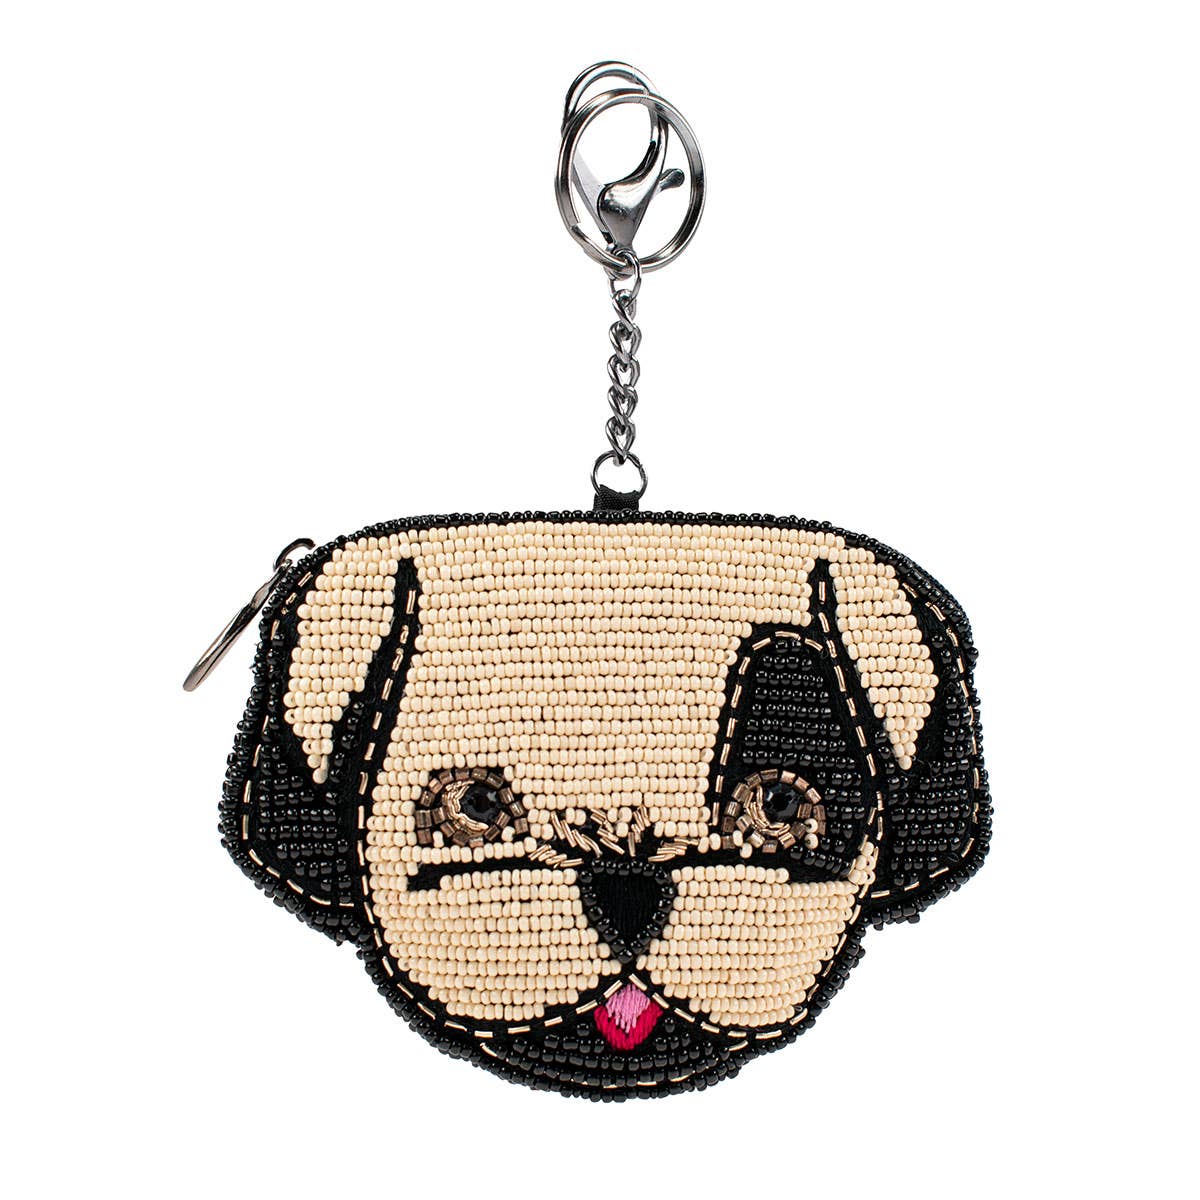 Mary Frances Accessories - Puppy Love Coin Purse/Key Fob